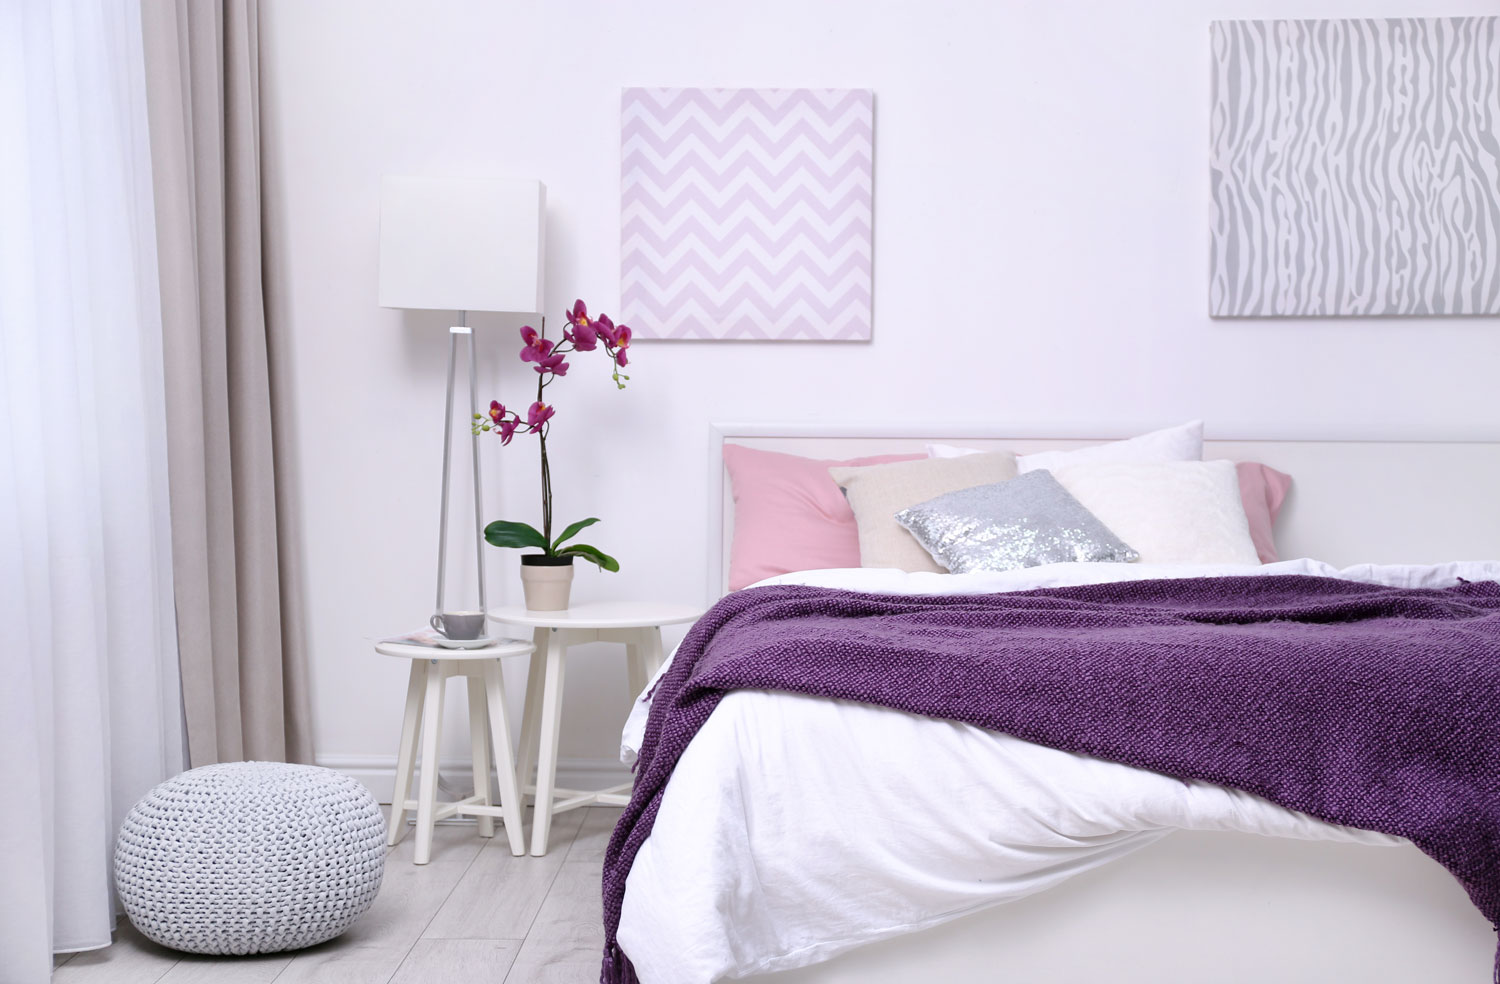 White and modern bedroom with white painted walls matched with lavender beddings and a chair nightstand with a lampshade